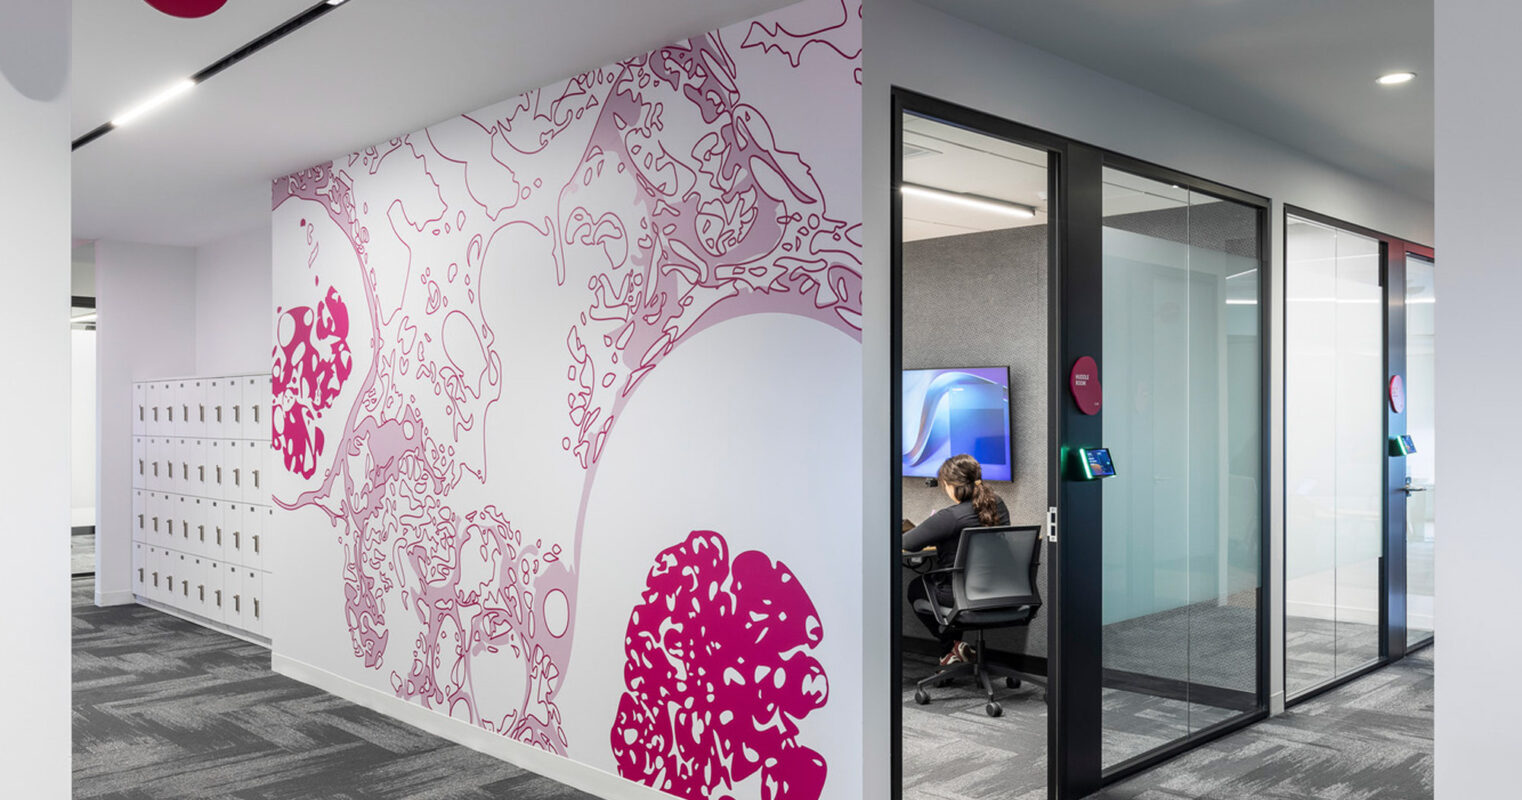 An office foyer featuring a striking magenta and white abstract wall graphic that contrasts with the grayscale carpeted floor. Glass doors with magenta decals lead to a workspace where an individual is seated, enhancing the space's contemporary and creative appeal.